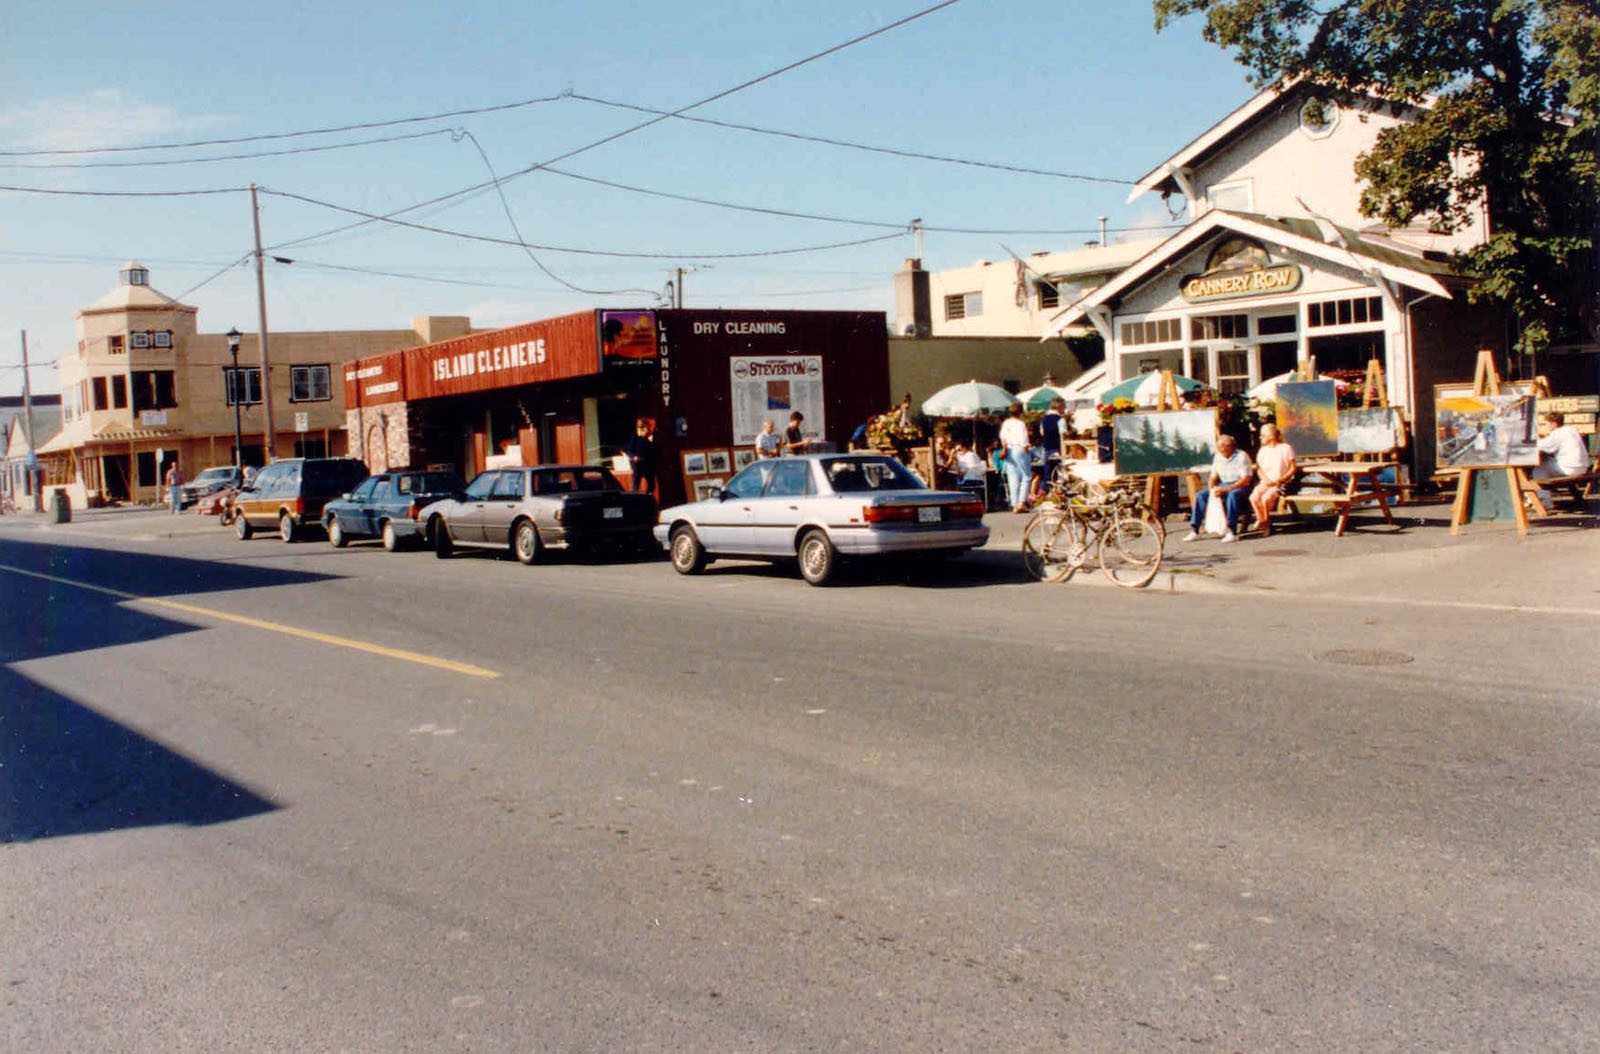 Cannery Row Cafe in Steveston in the early 1980s (now the Steveston Cannery Cafe).